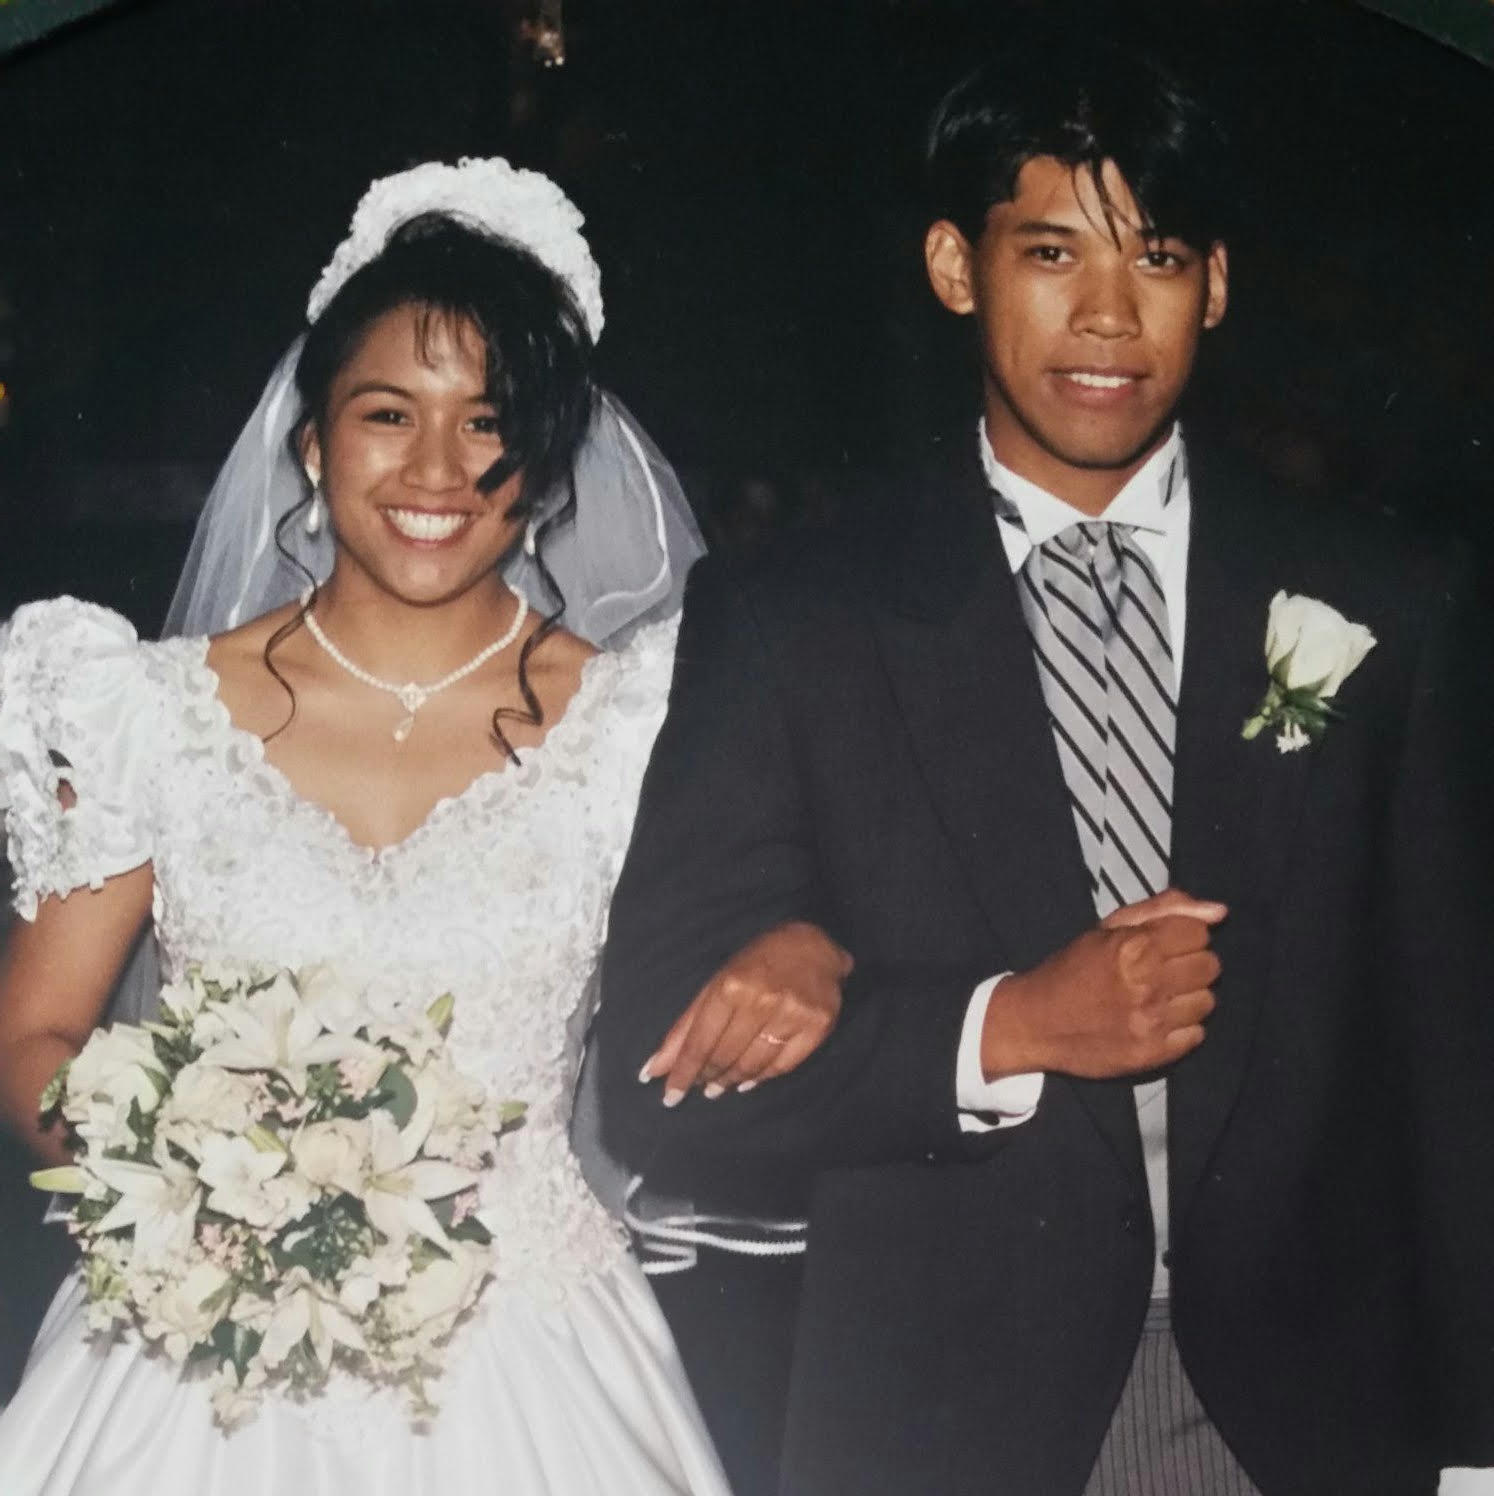 A photo of a woman wearing a wedding dress arm in arm with a man wearing a suit. 